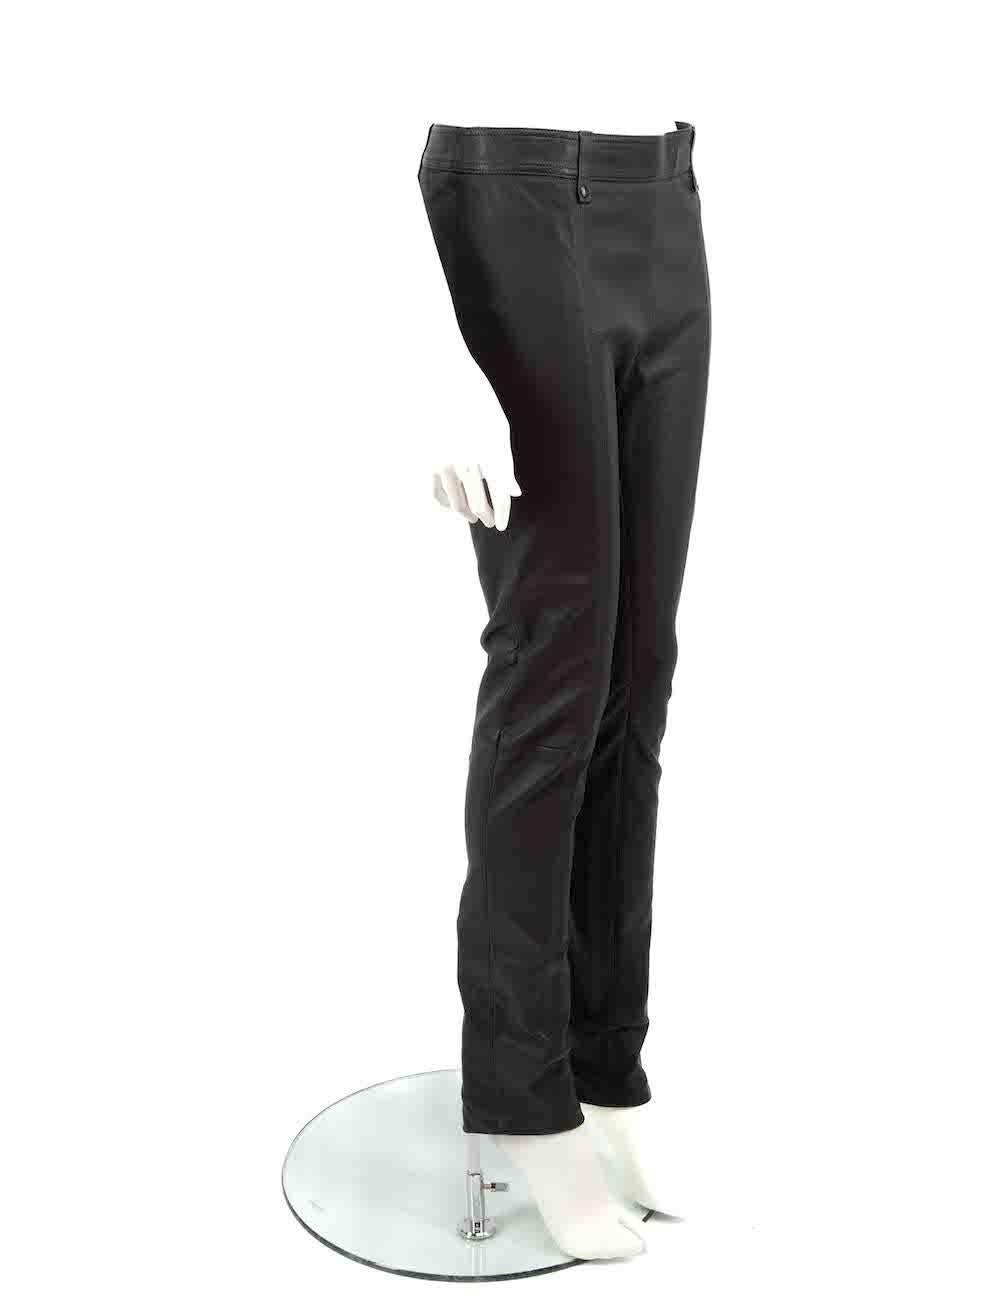 CONDITION is Never worn. No visible wear to trousers is evident on this new Tom Ford designer resale item.
 
 Details
 Grey
 Leather
 Trousers
 Slim fit
 Zipped cuffs
 Side zip fastening
 
 
 Made in Italy
 
 Composition
 100% Lamb leather
 
 Care